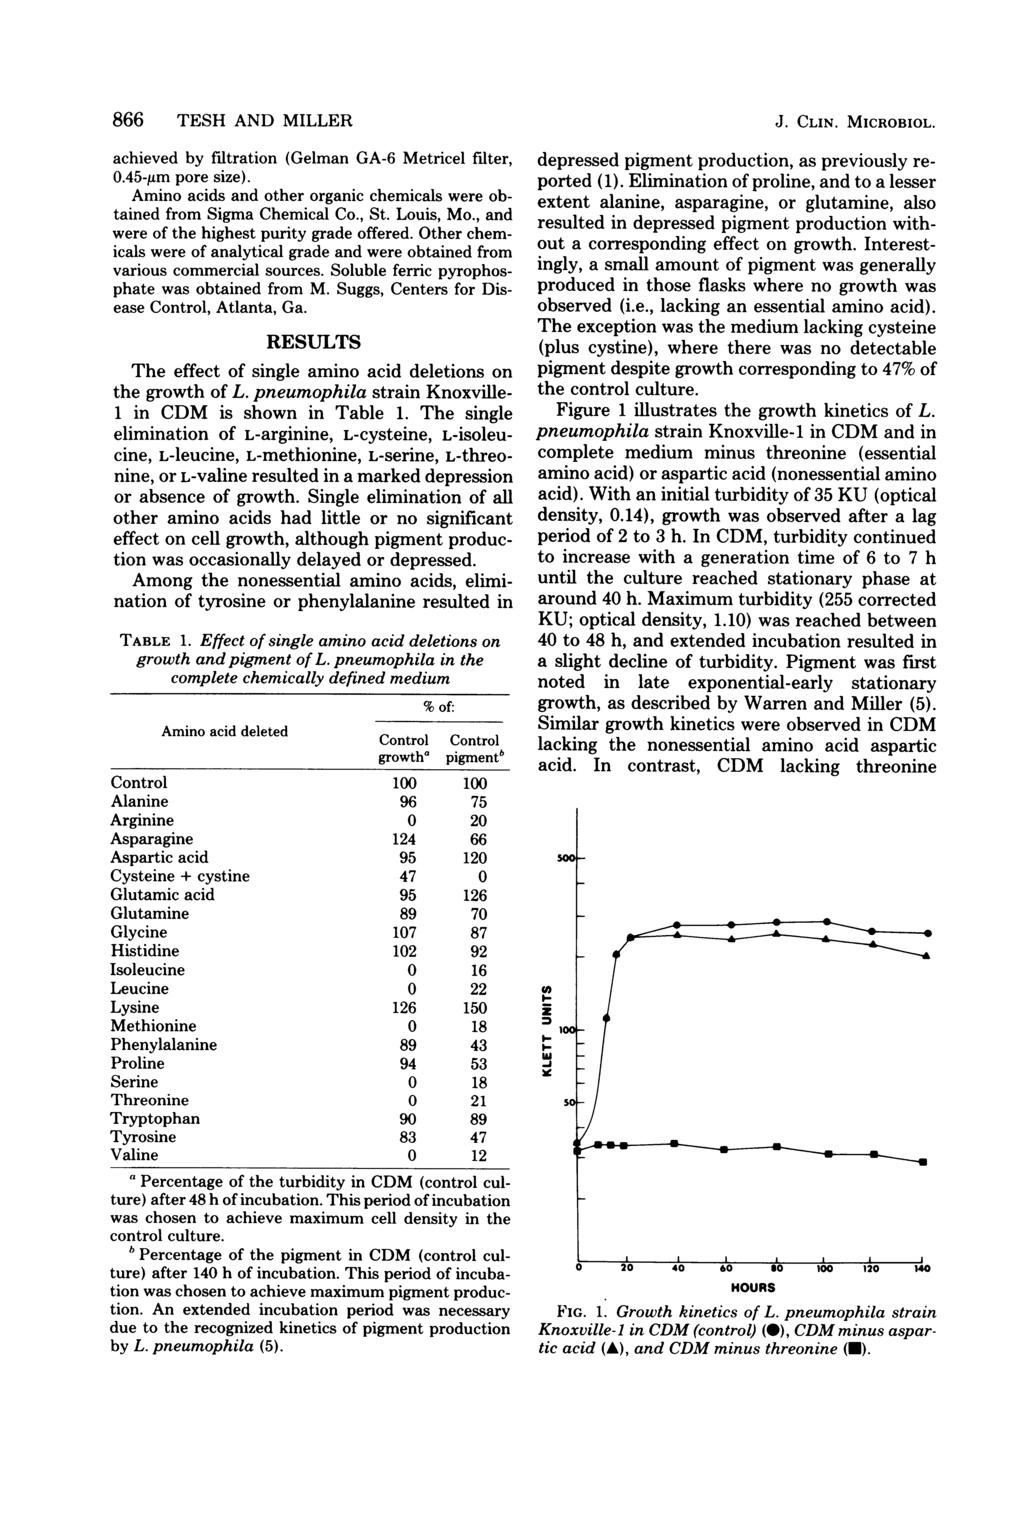 866 TESH AND MILLER achieved by filtration (Gelman GA-6 Metricel filter, 0.45-jum pore size). Amino acids and other organic chemicals were obtained from Sigma Chemical Co., St. Louis, Mo.